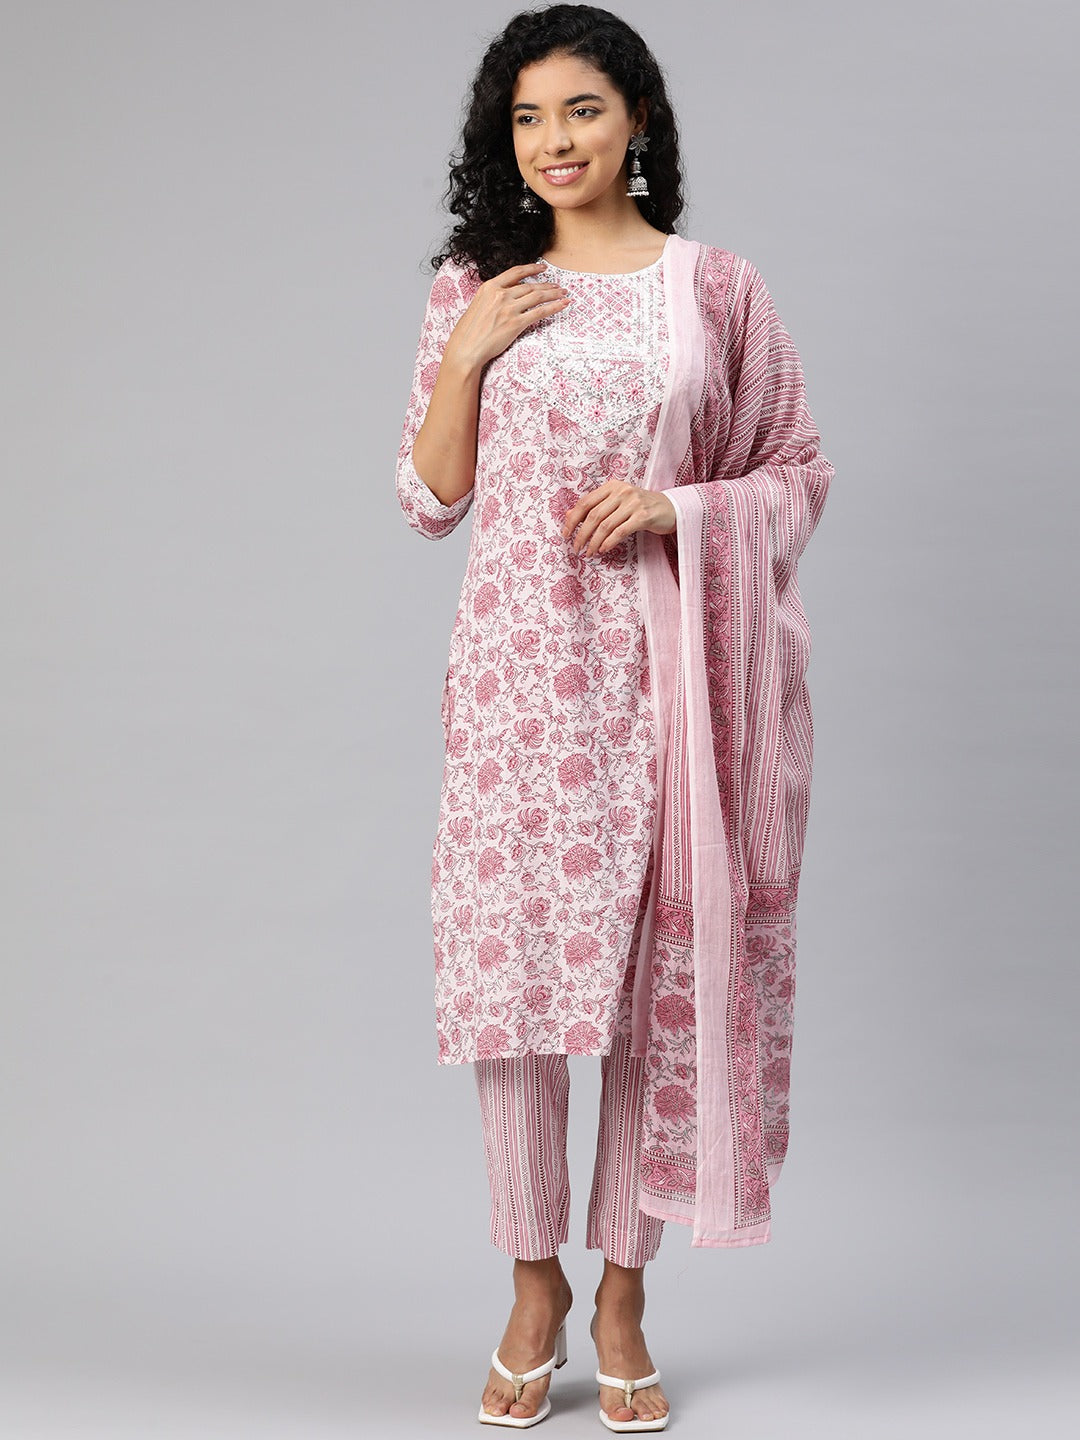 Straight Style Cotton Fabric Pink Color Kurta And Bottom With Dupatta